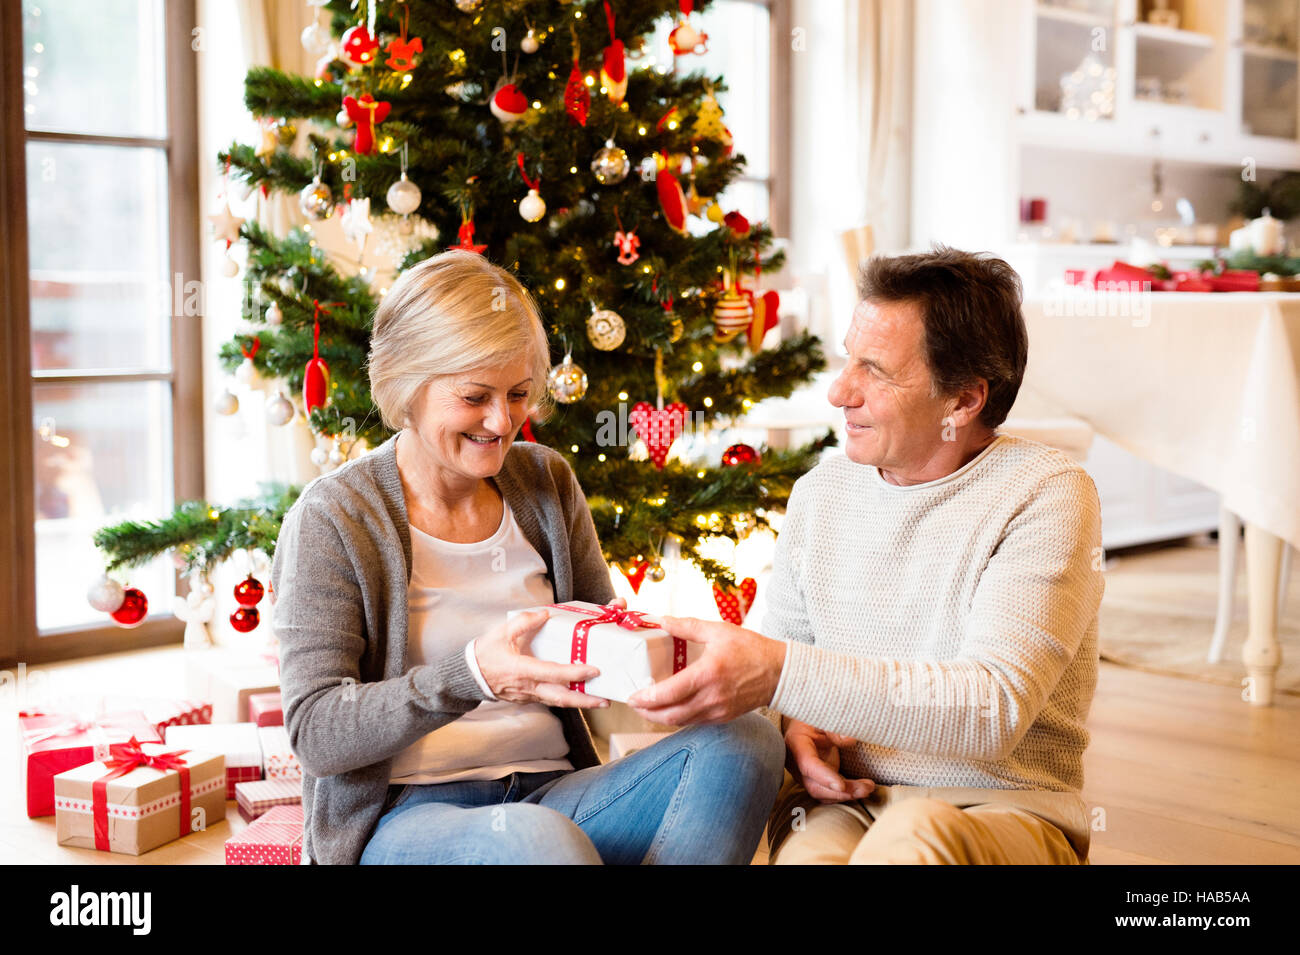 Senior couple in front of Christmas tree with presents. Stock Photo